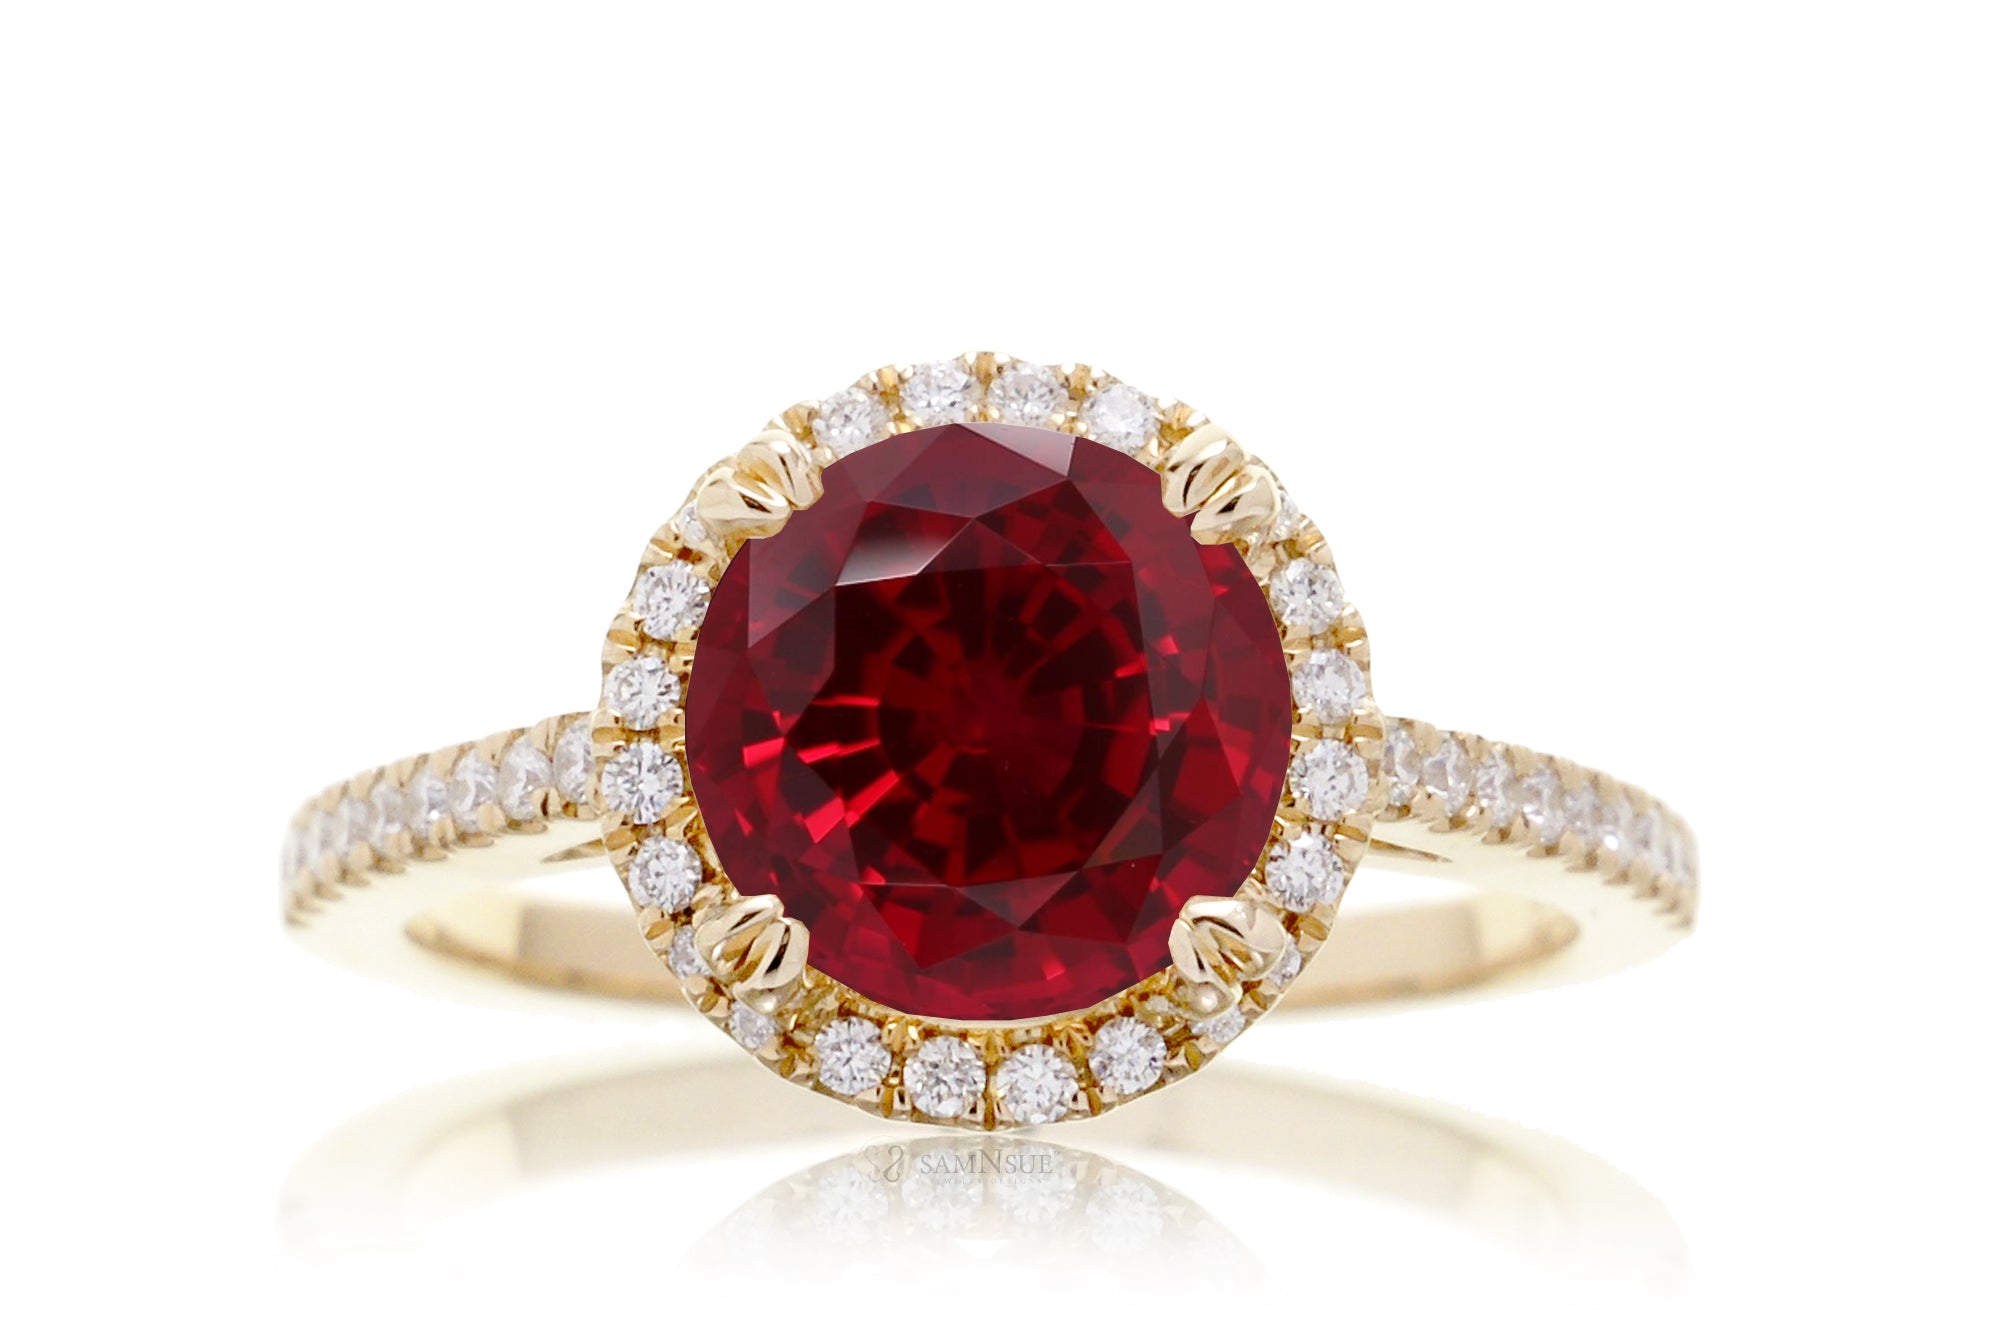 The Signature Round Lab-Grown Ruby